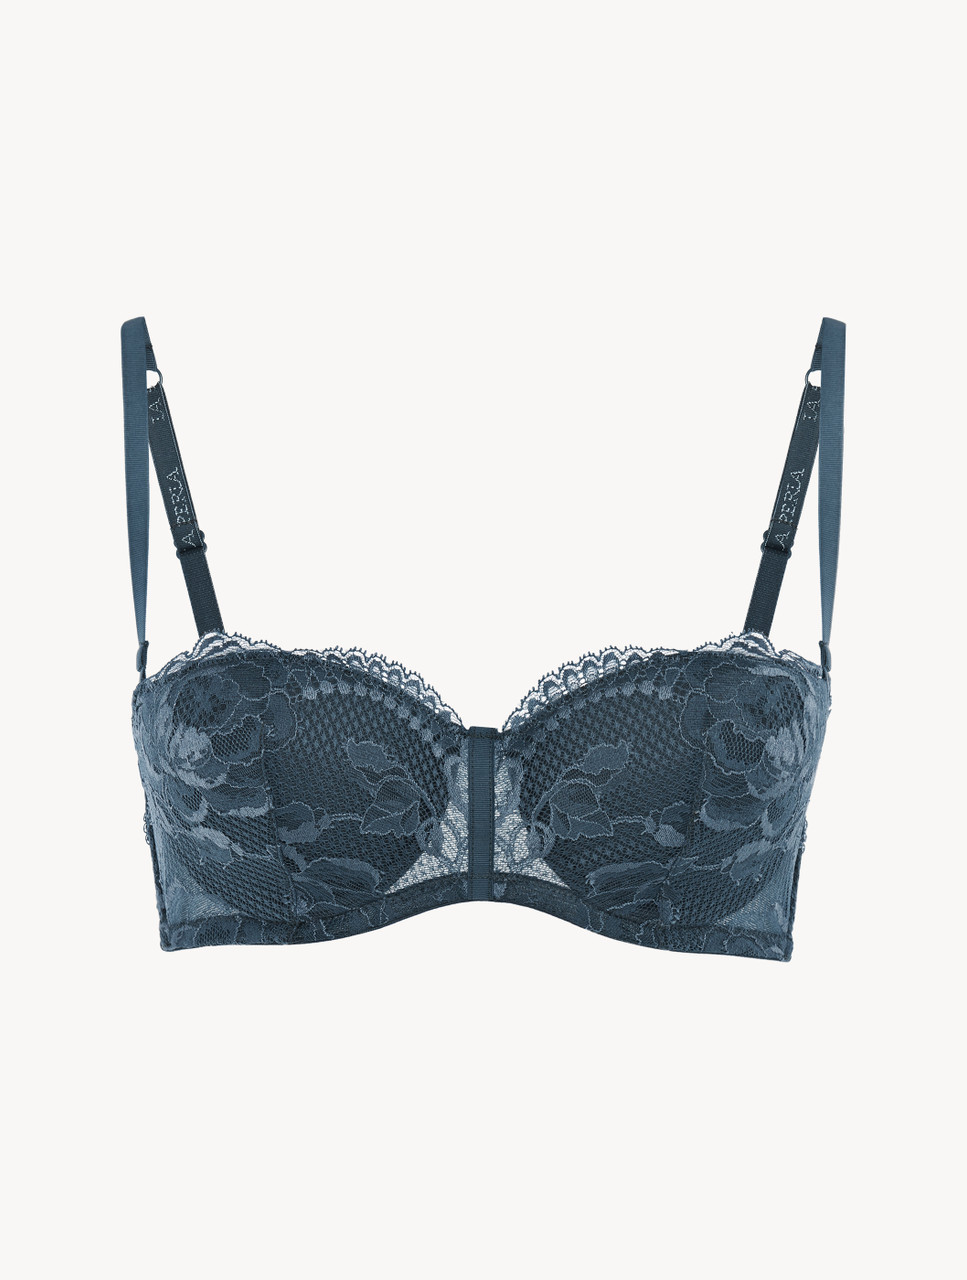 Navy Blue Sheer Elastic Lace Bandeau Top, Strapless Bra 